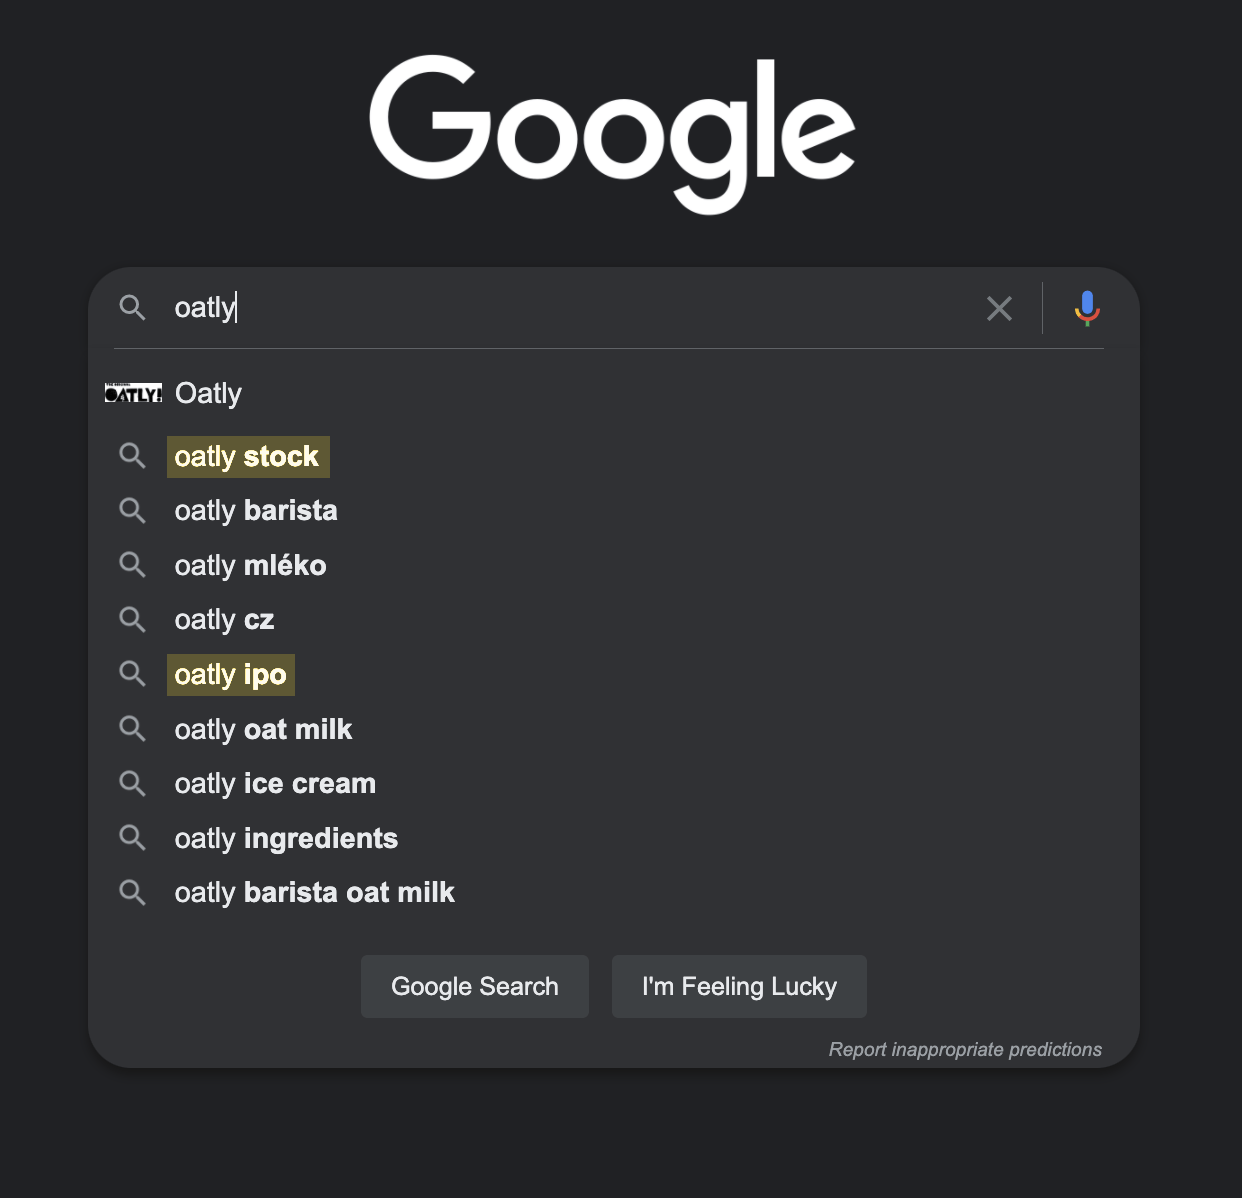 Search term "oatly" in text field on Google